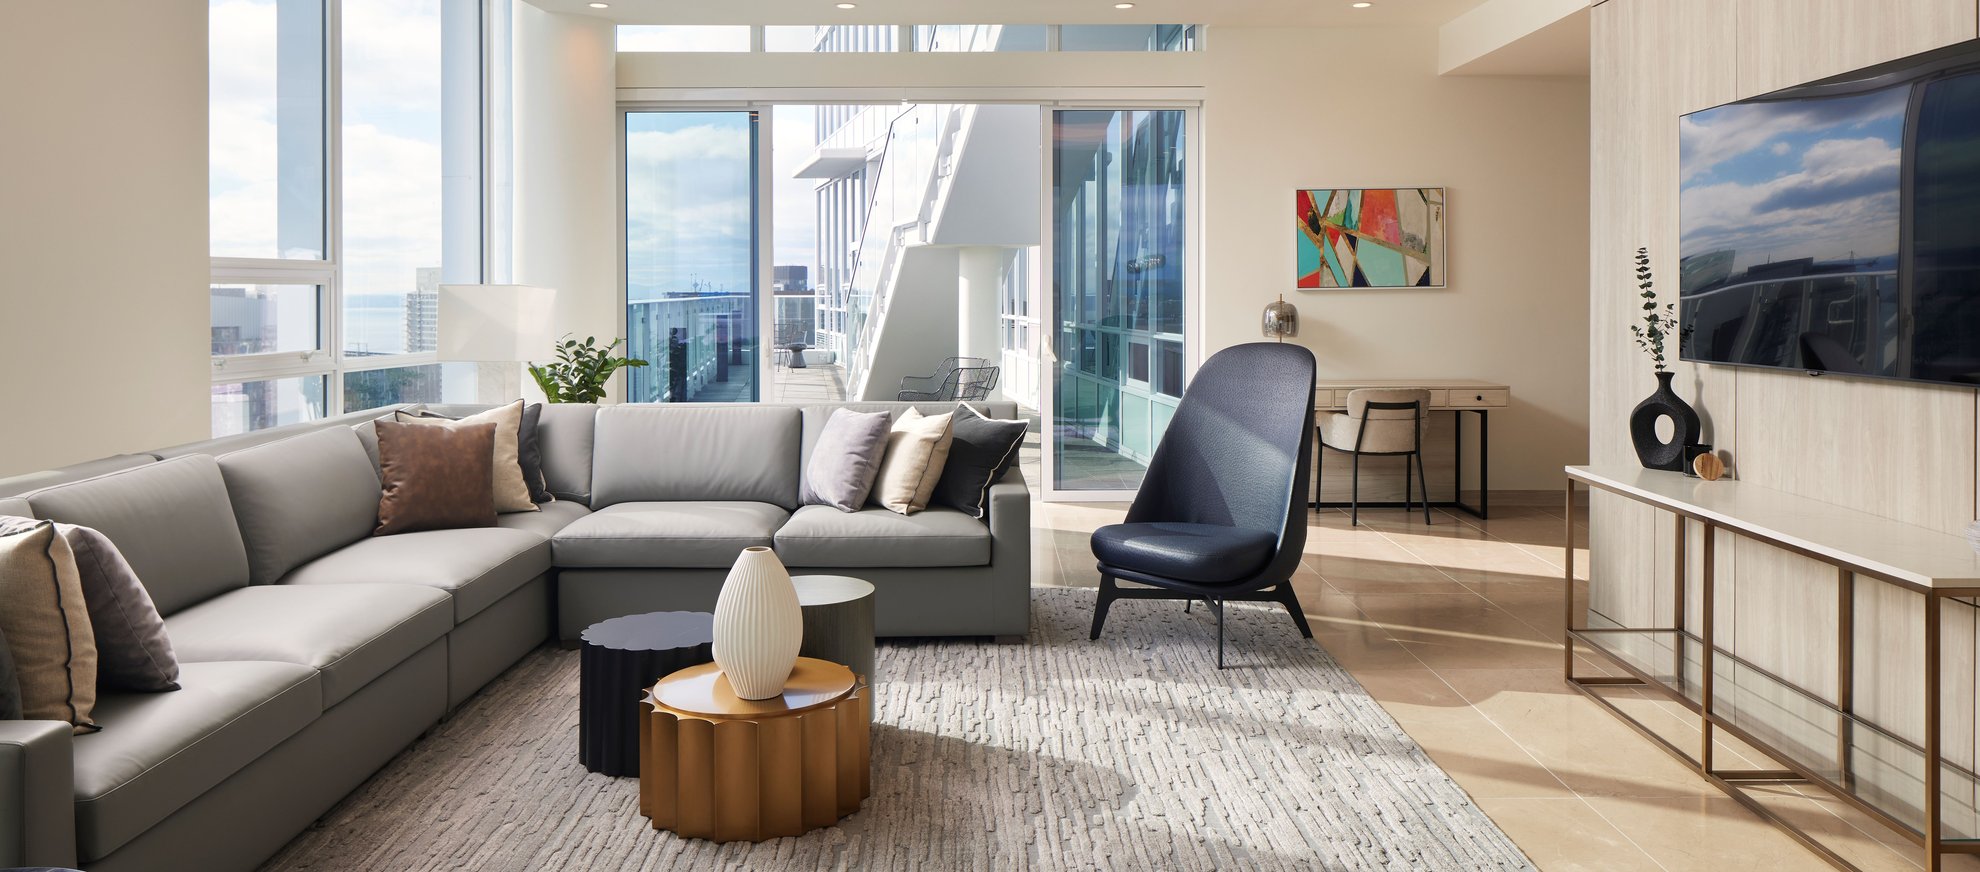 modern living room features l shaped sofa, tv wall mounted, high ceilings at level seattle south lake union the penthouse.jpg